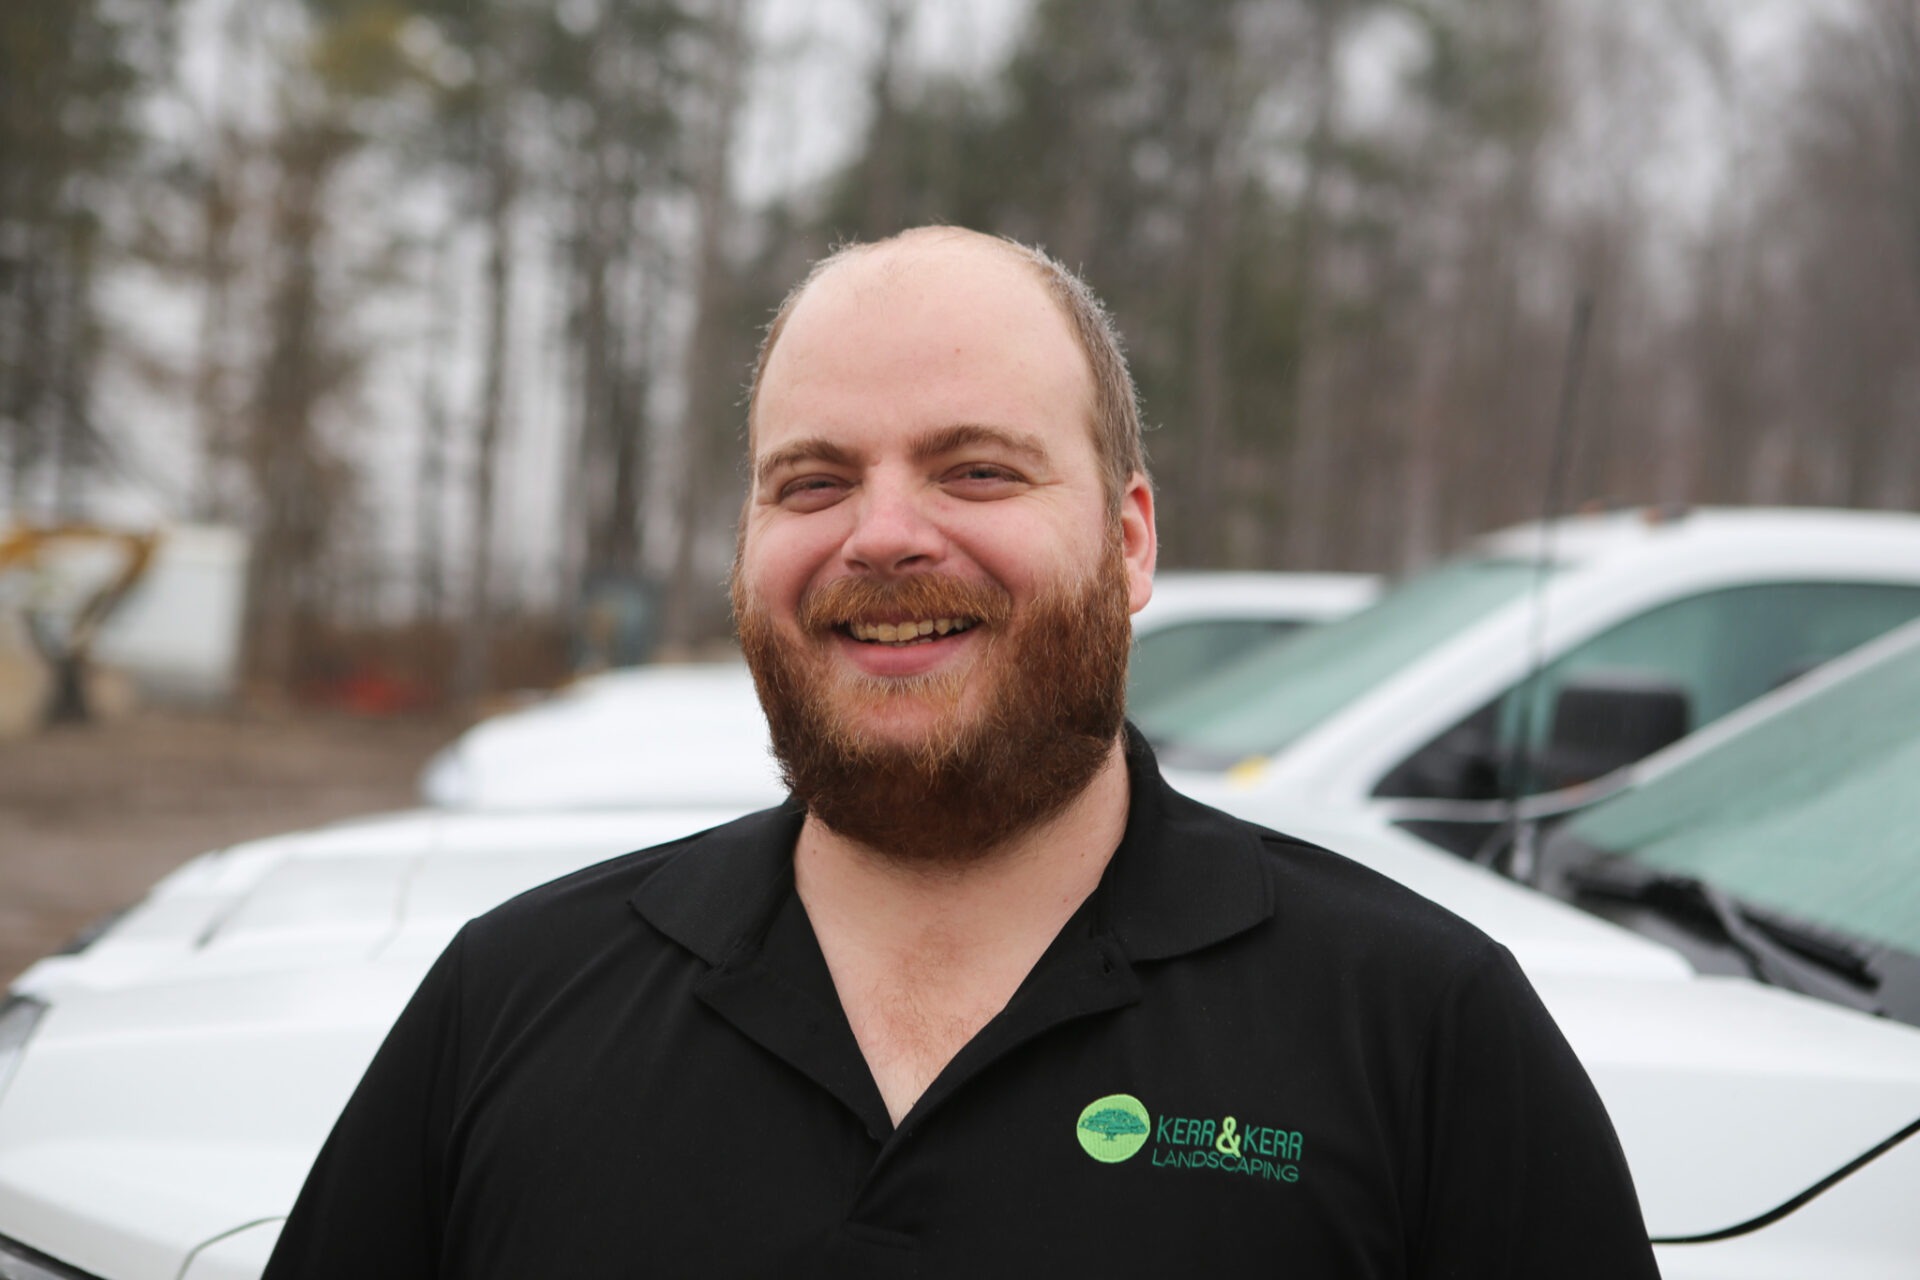 A person with a beard is smiling in front of vehicles, wearing a black shirt with a landscaping company logo, in a blurred background setting.